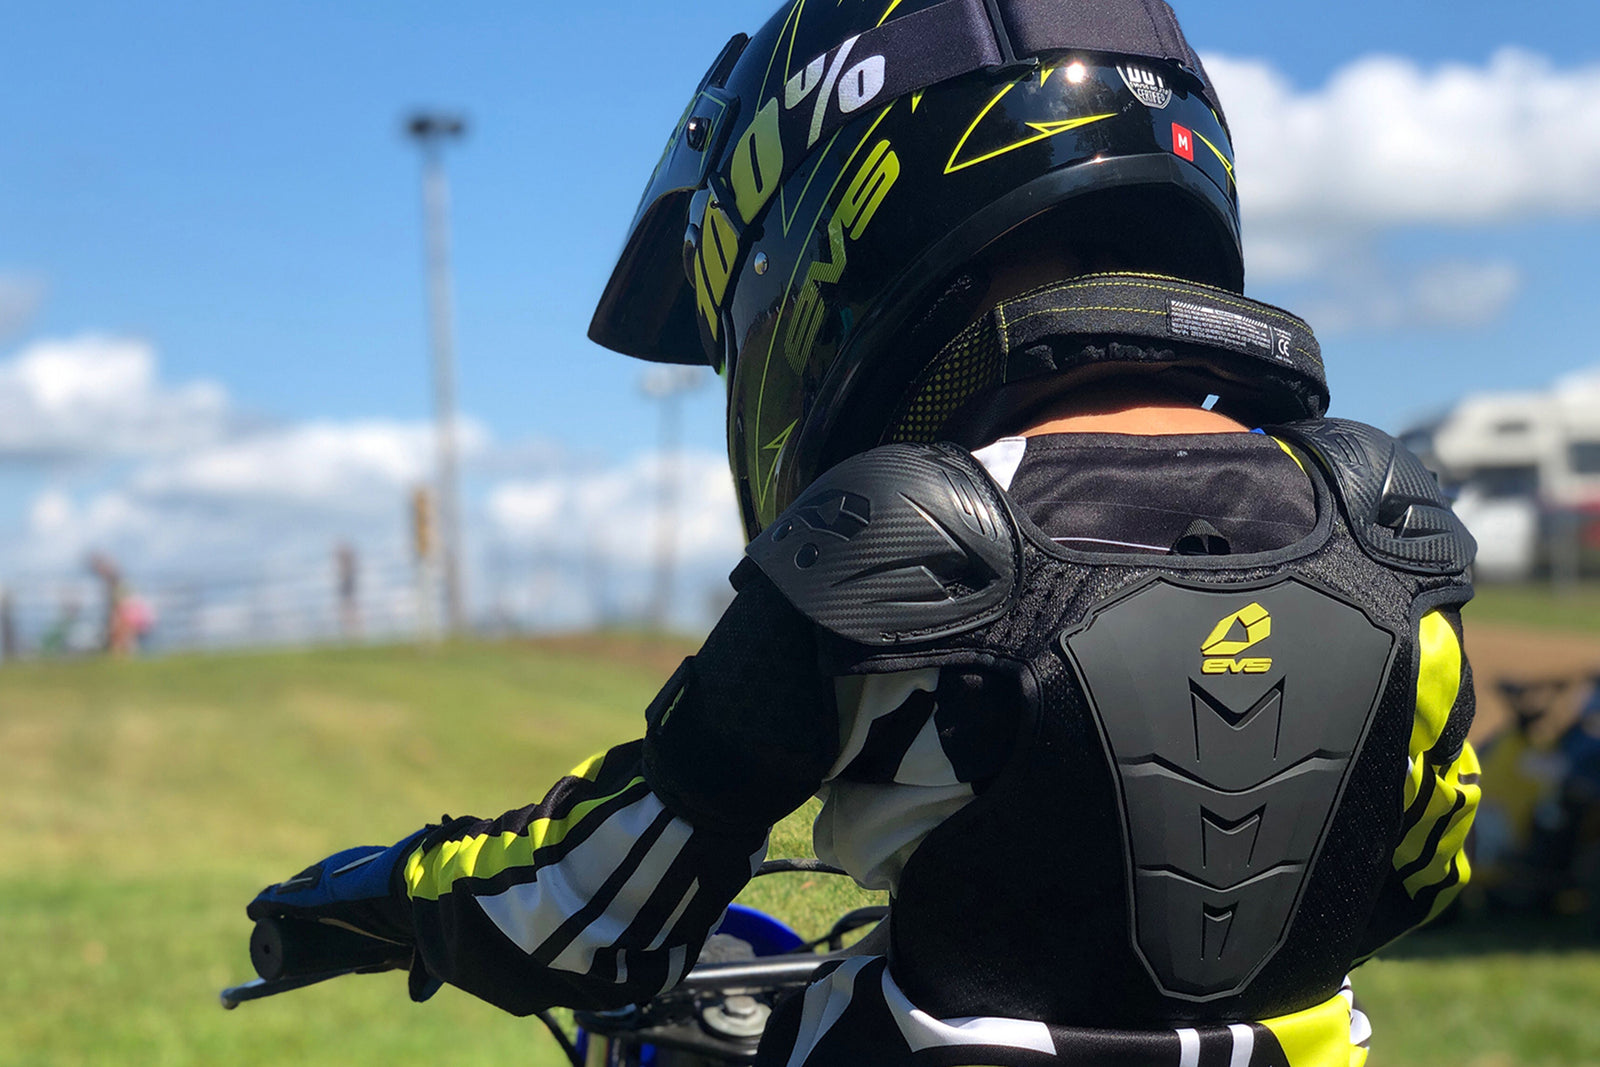 EVS Sports Warm-Weather Riding Gear - Cycle News